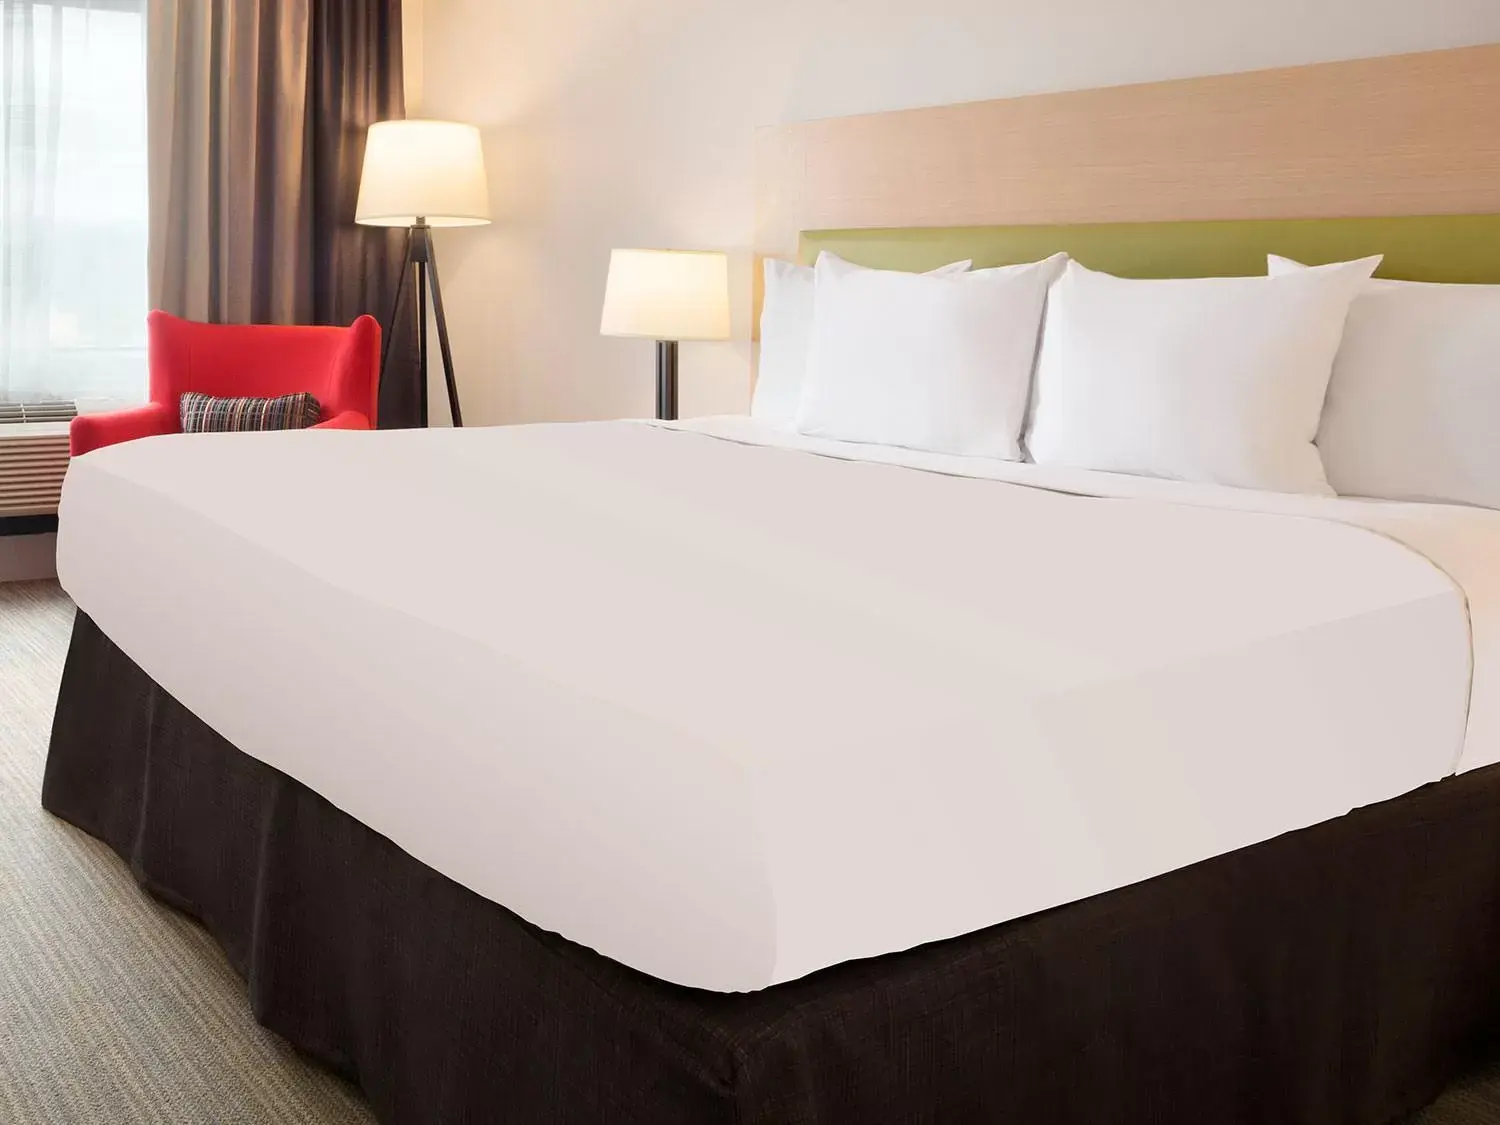 Bed in Country Inn & Suites by Radisson, Council Bluffs, IA